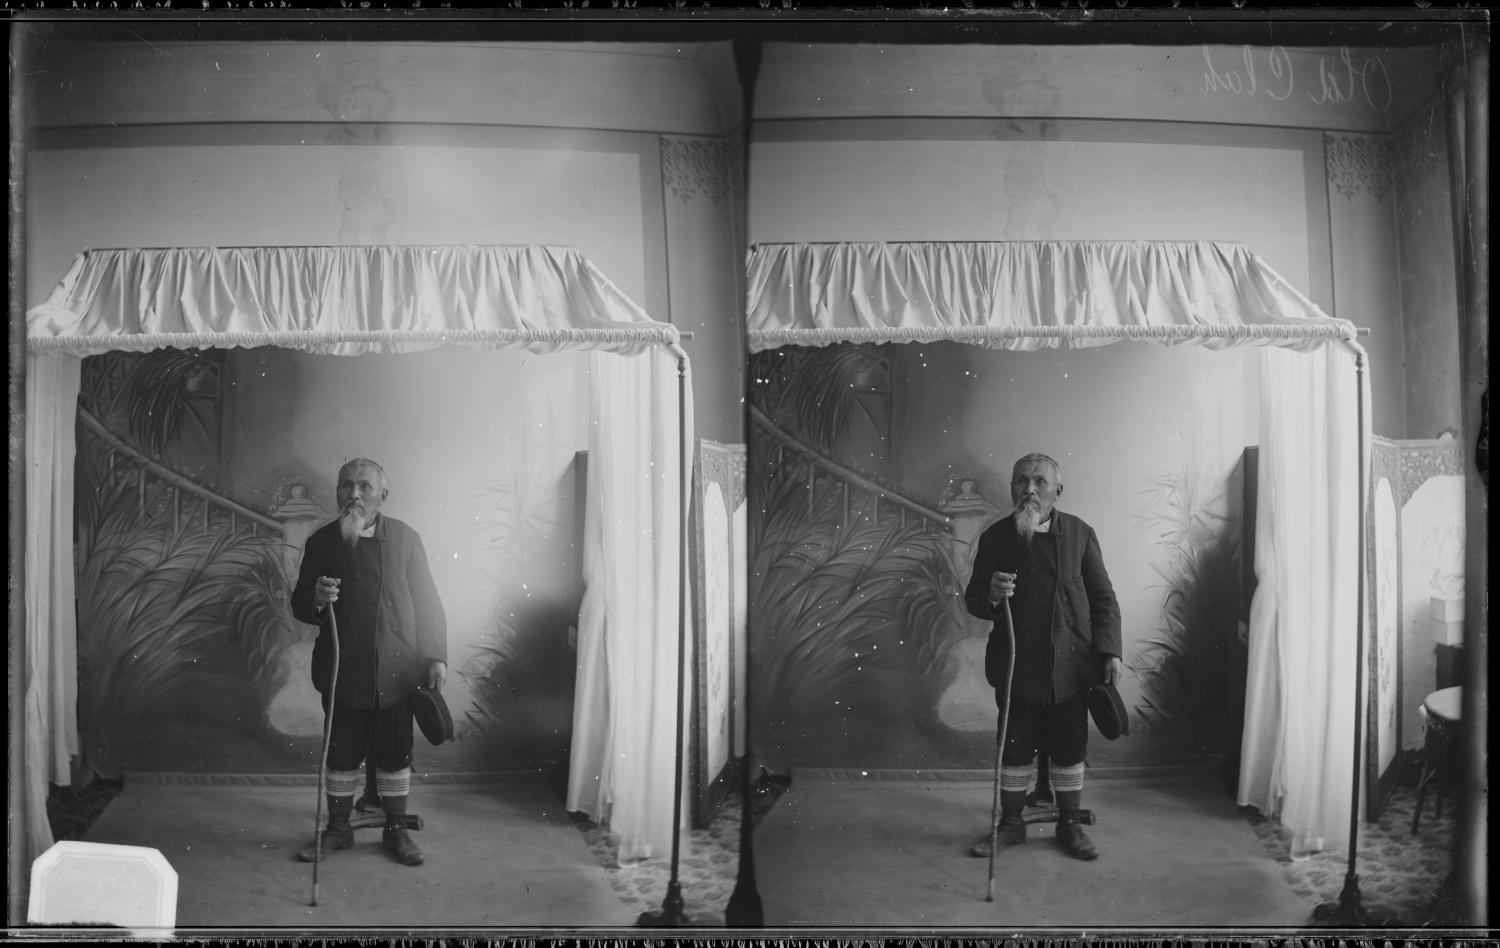 Portrait (full-length) of an unidentified Indigenous individual, likely Tsimshian Chief Arthur Wellington Clah, standing taken at a photographic studio attributed to Mrs. R. Maynards Photographic Gallery.